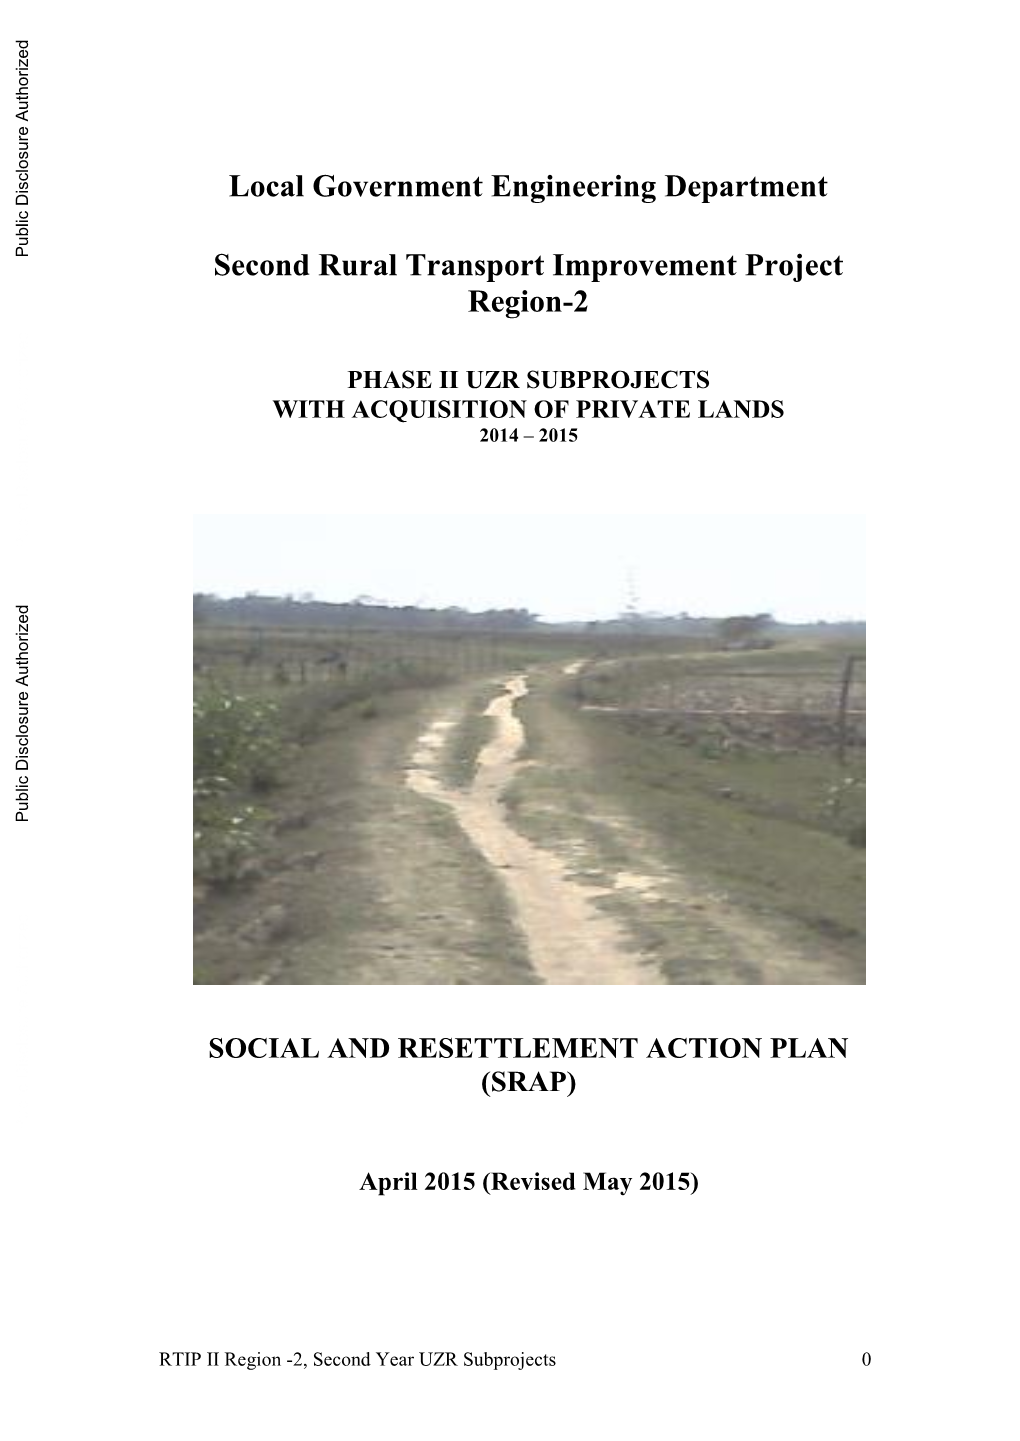 Social and Resettlement Action Plan (Srap)